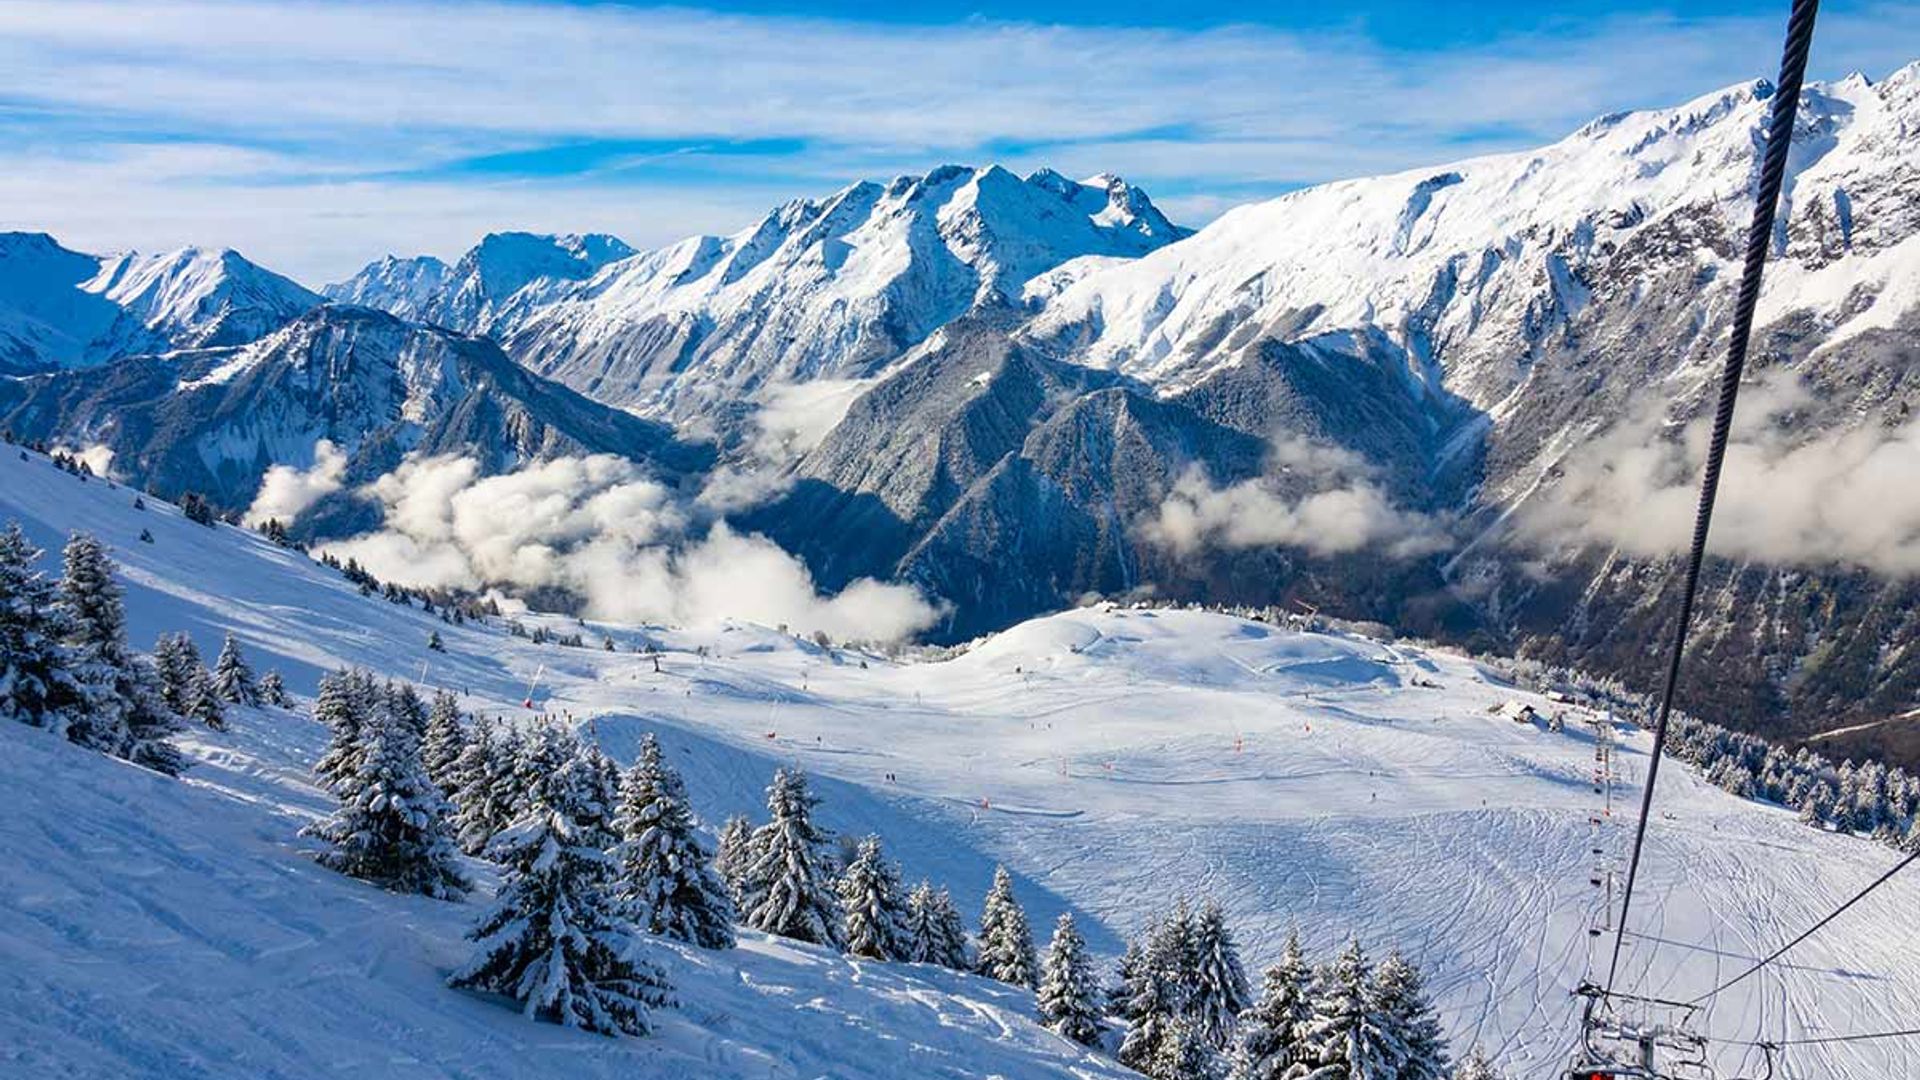 Skiing in Vaujany: Family fun in the French Alps